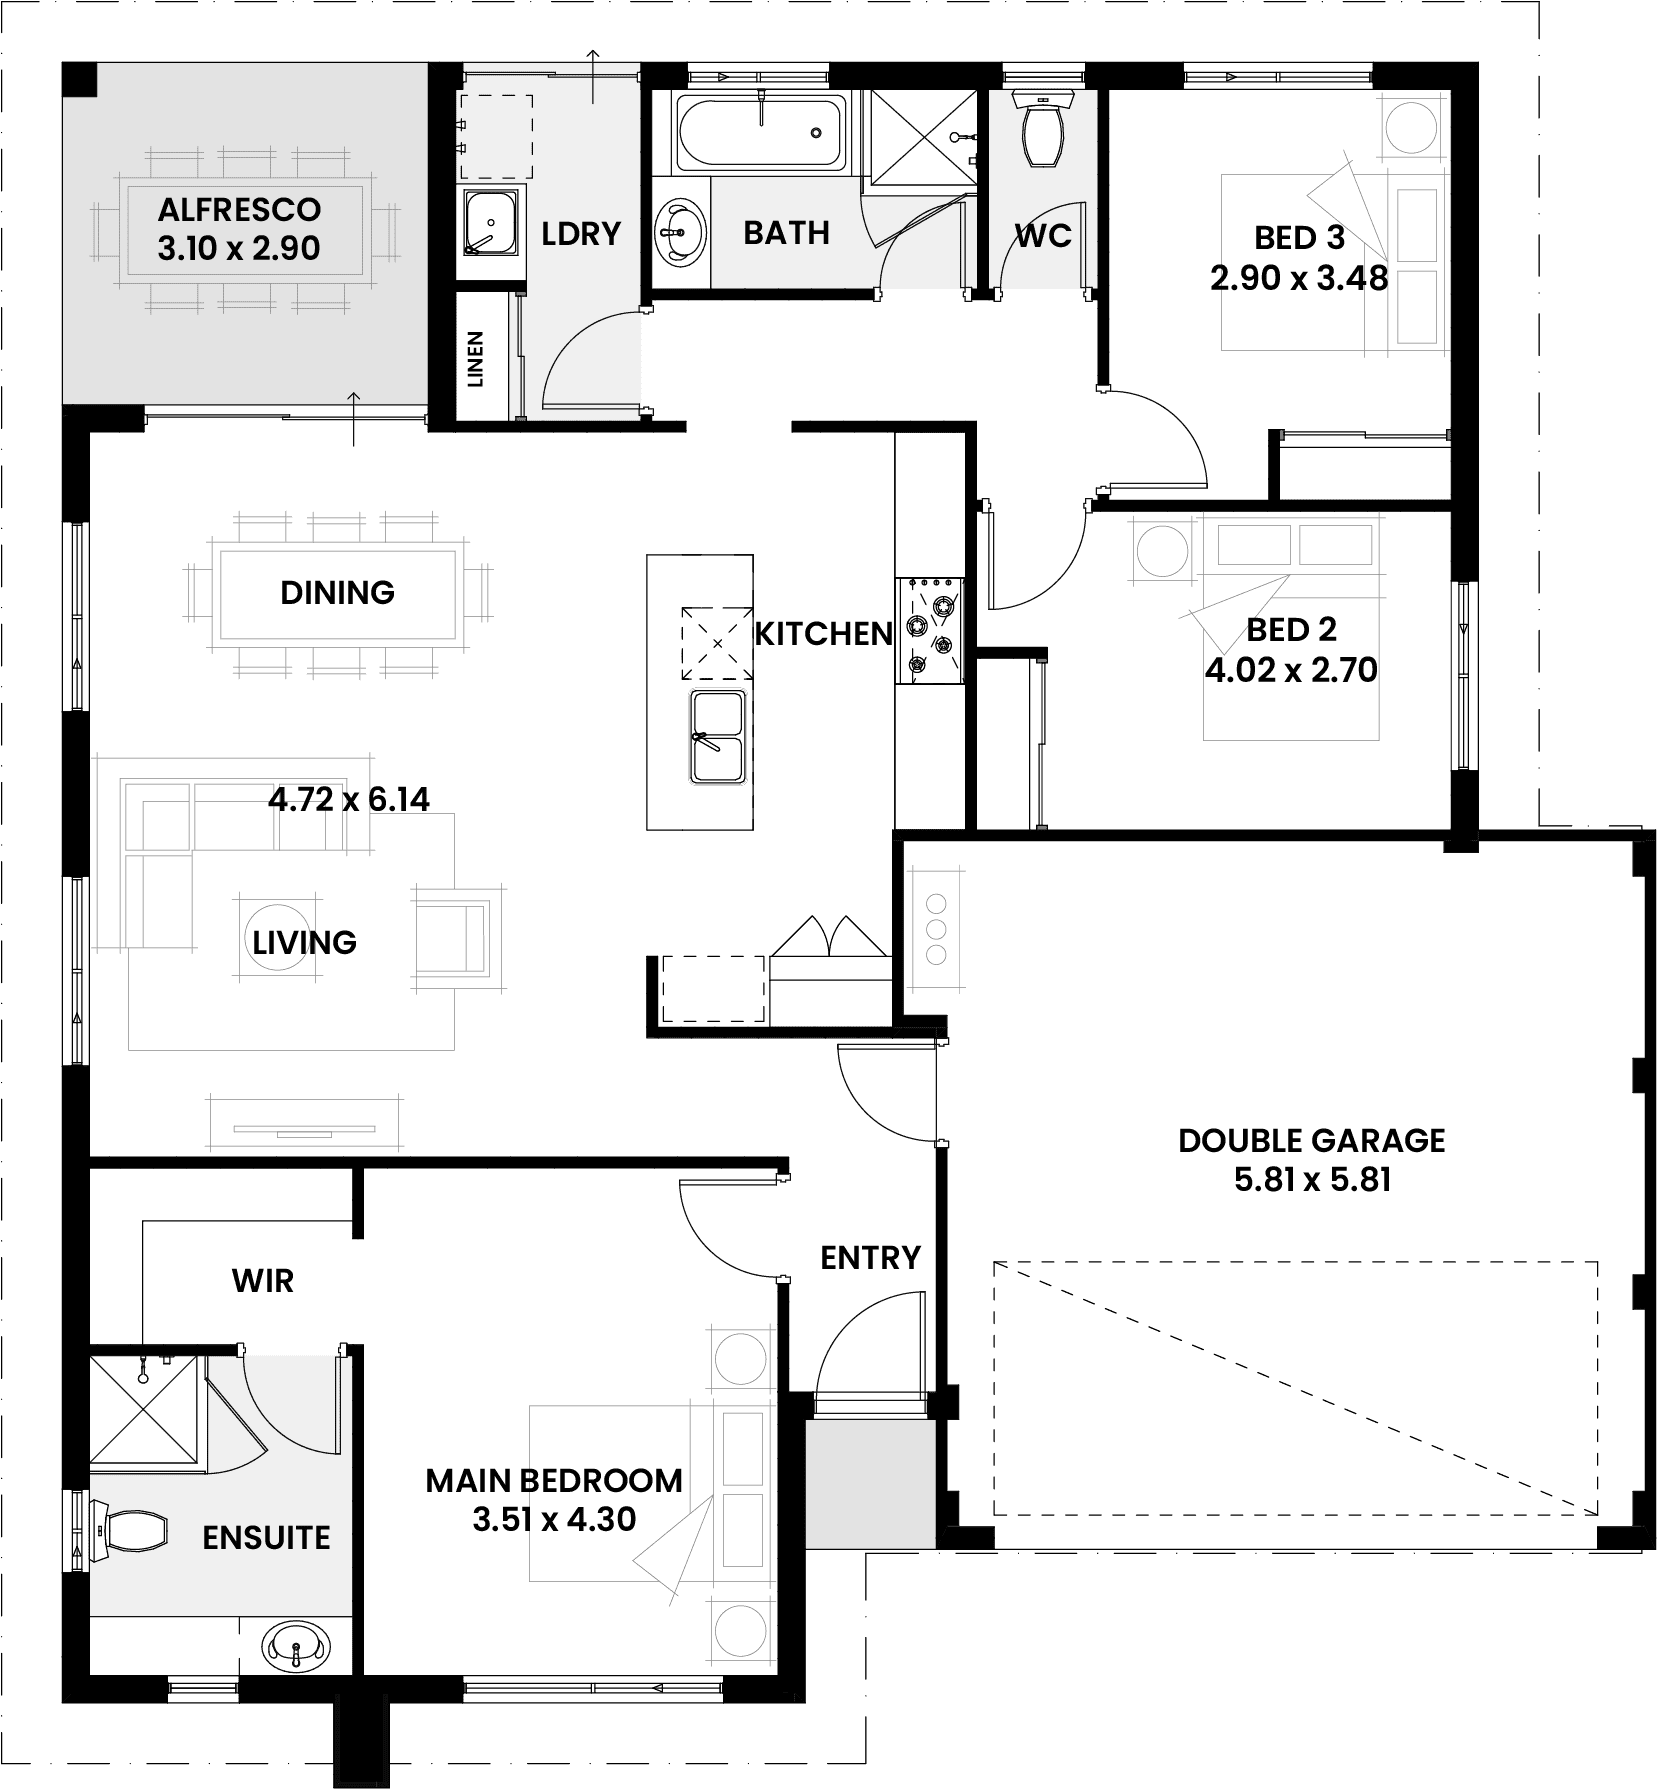 Floorplan for The Hickory, a Move Homes new home design perfect for first time buyers and new builders in Perth